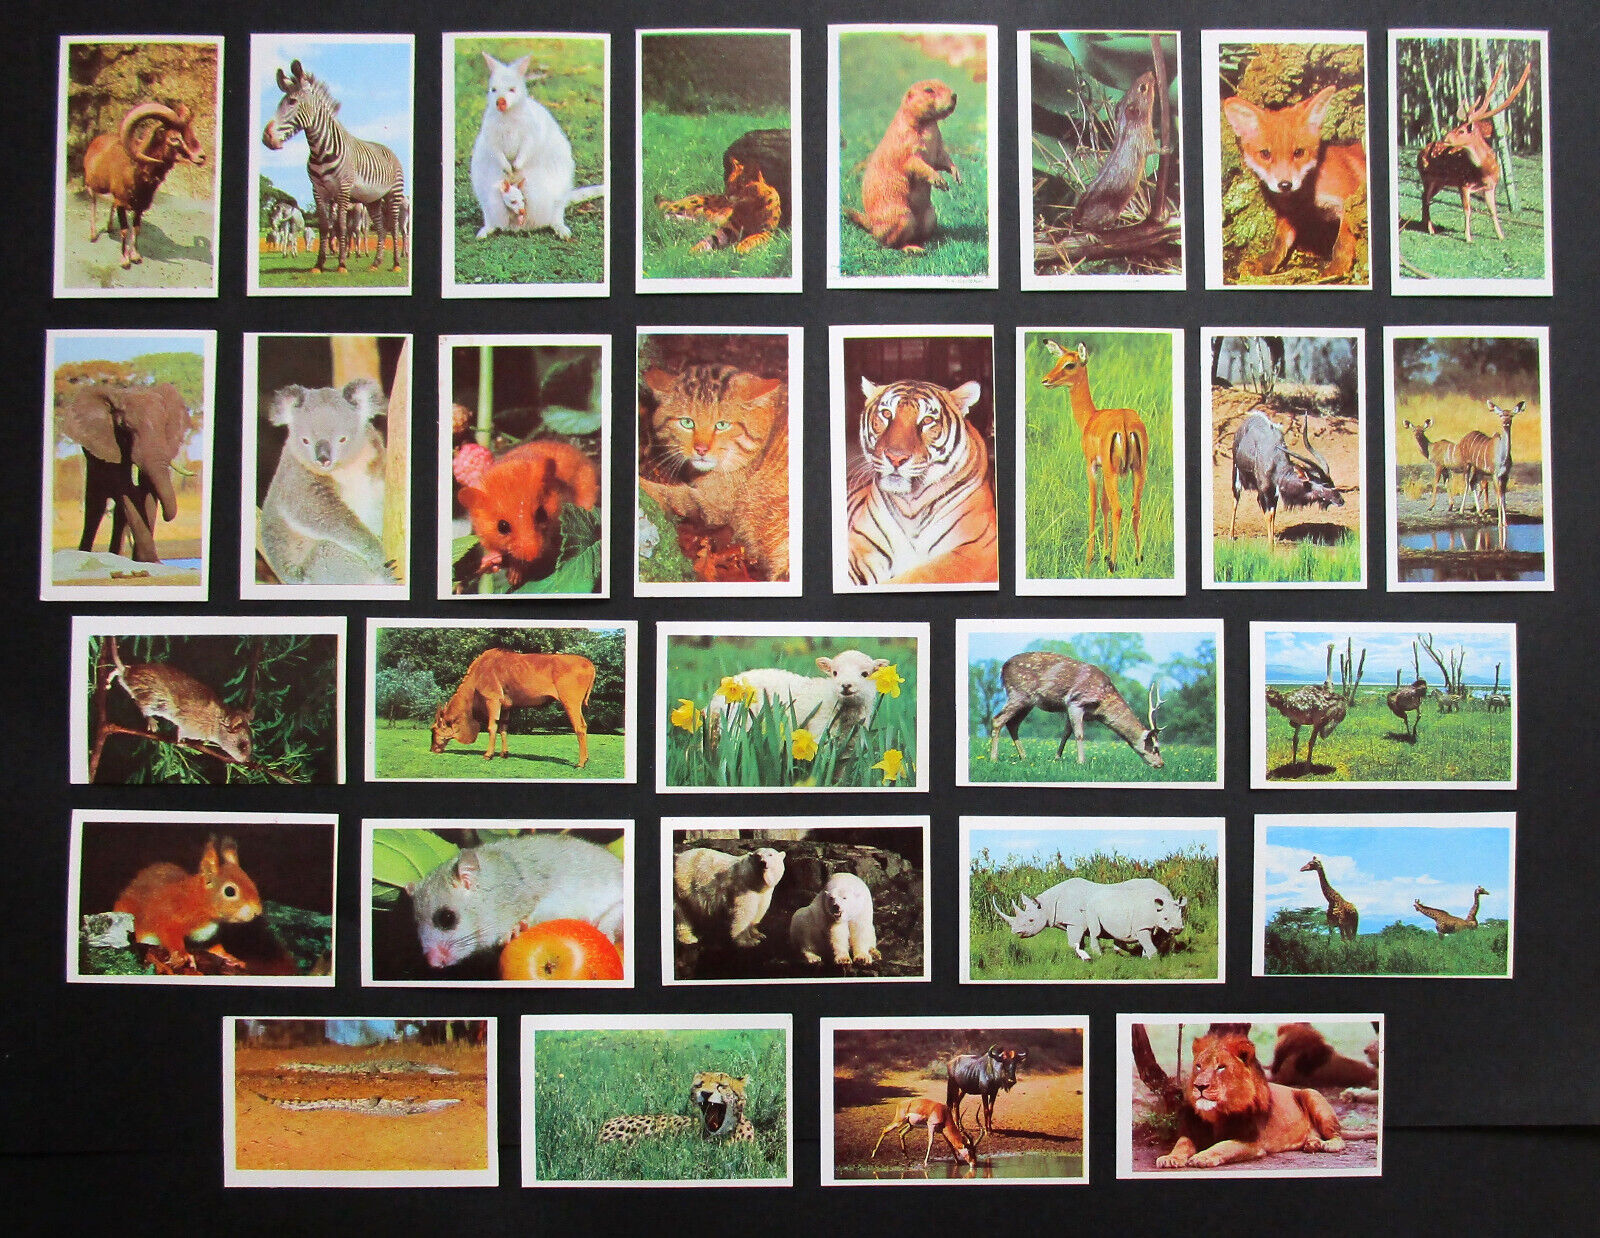 TRUCARDS  FULL SET OF 30 VERY COLLECTABLE  VINTAGE 1972 TRADE CARDS   ANIMALS